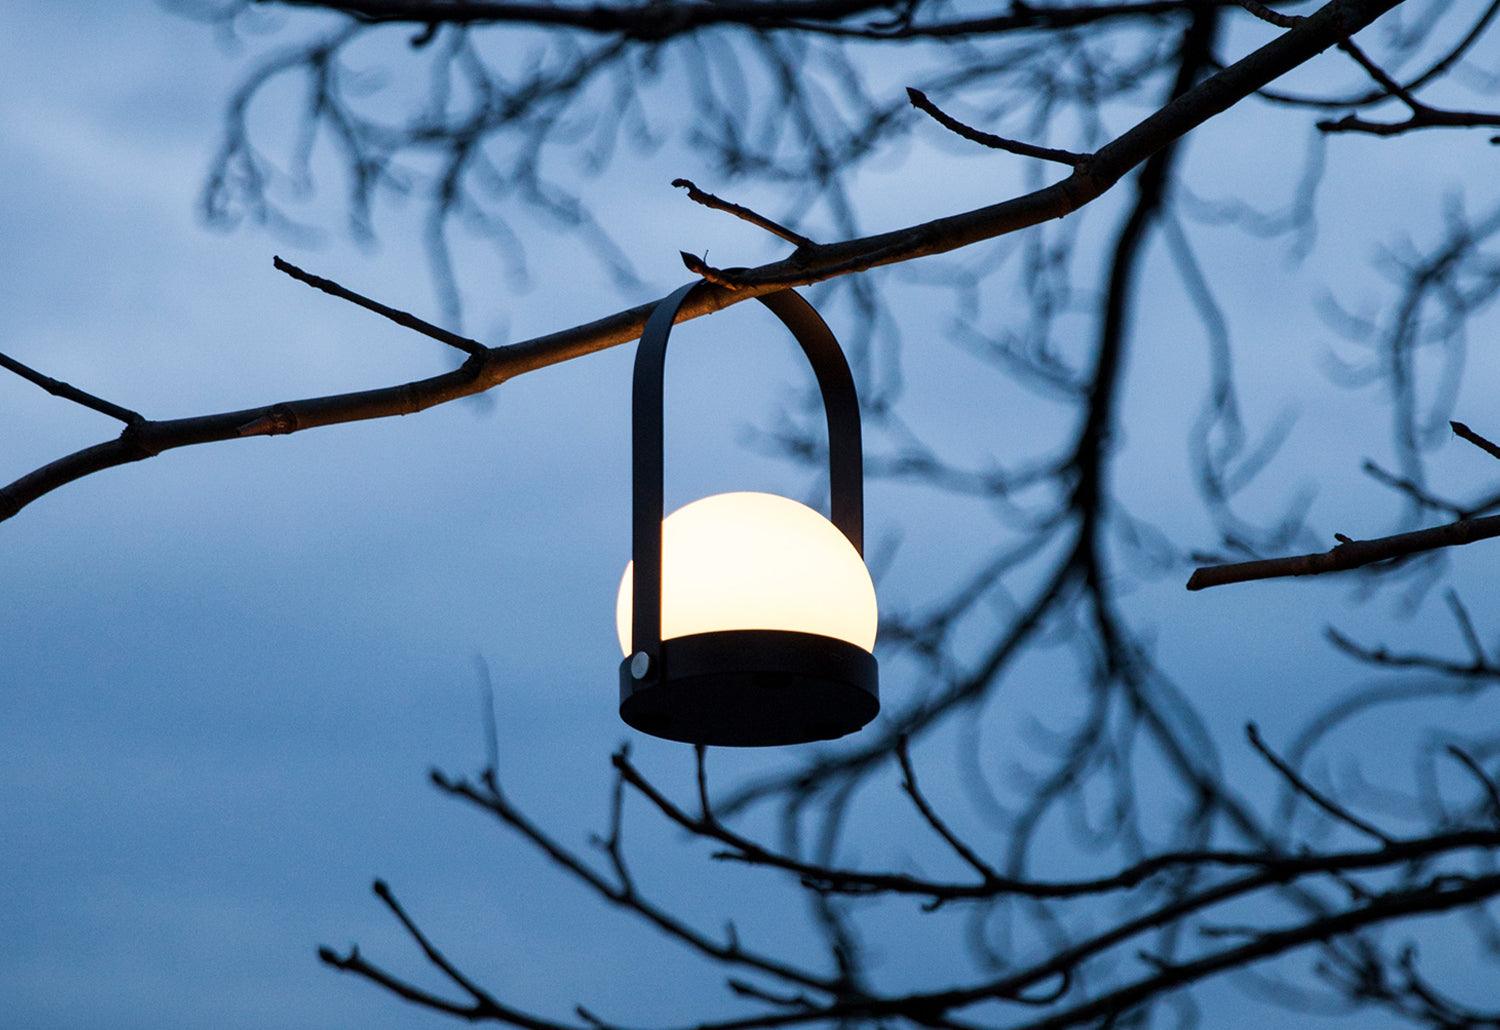  The The Carrie Portable Lamp by Norm Architects for Audo Copenhagen in black hung in a tree.